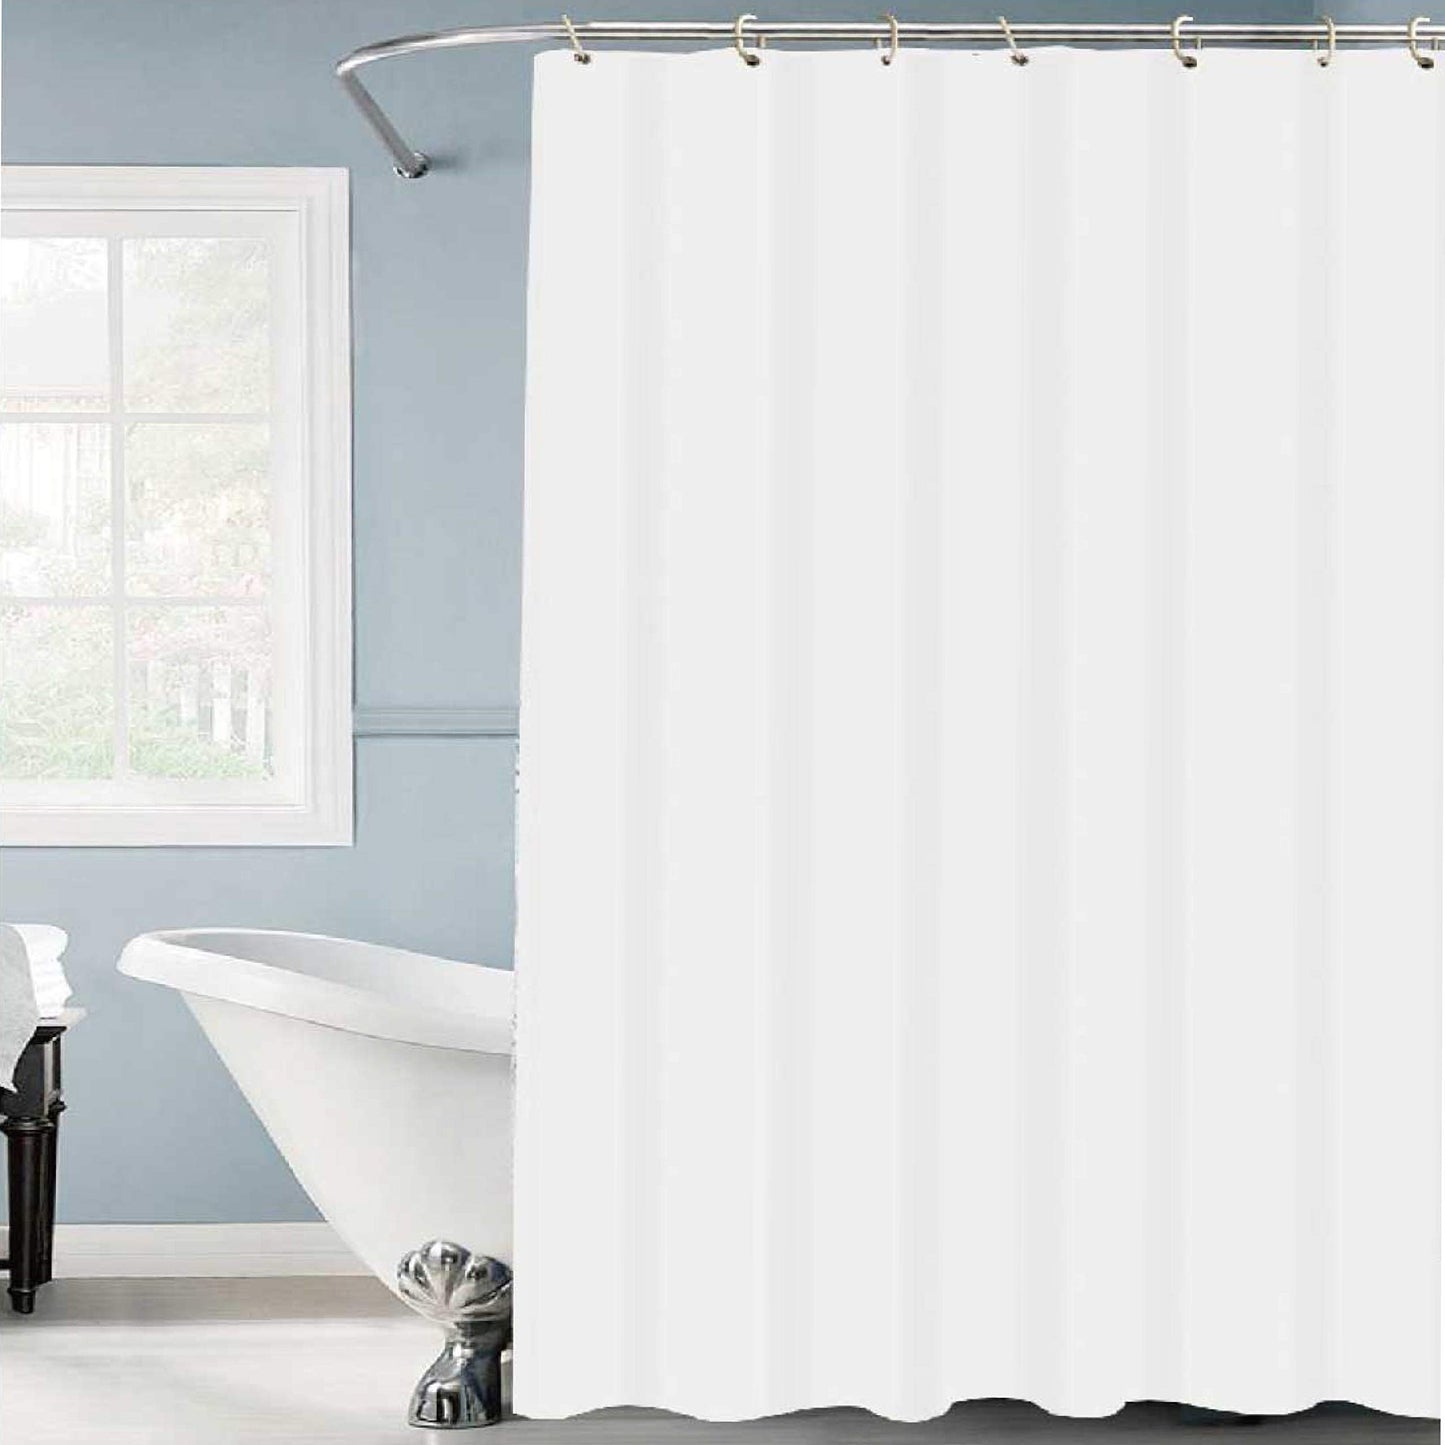 Bath Bliss 70" x 72" Polyester Shower Curtain with Splash Guard in White Solid